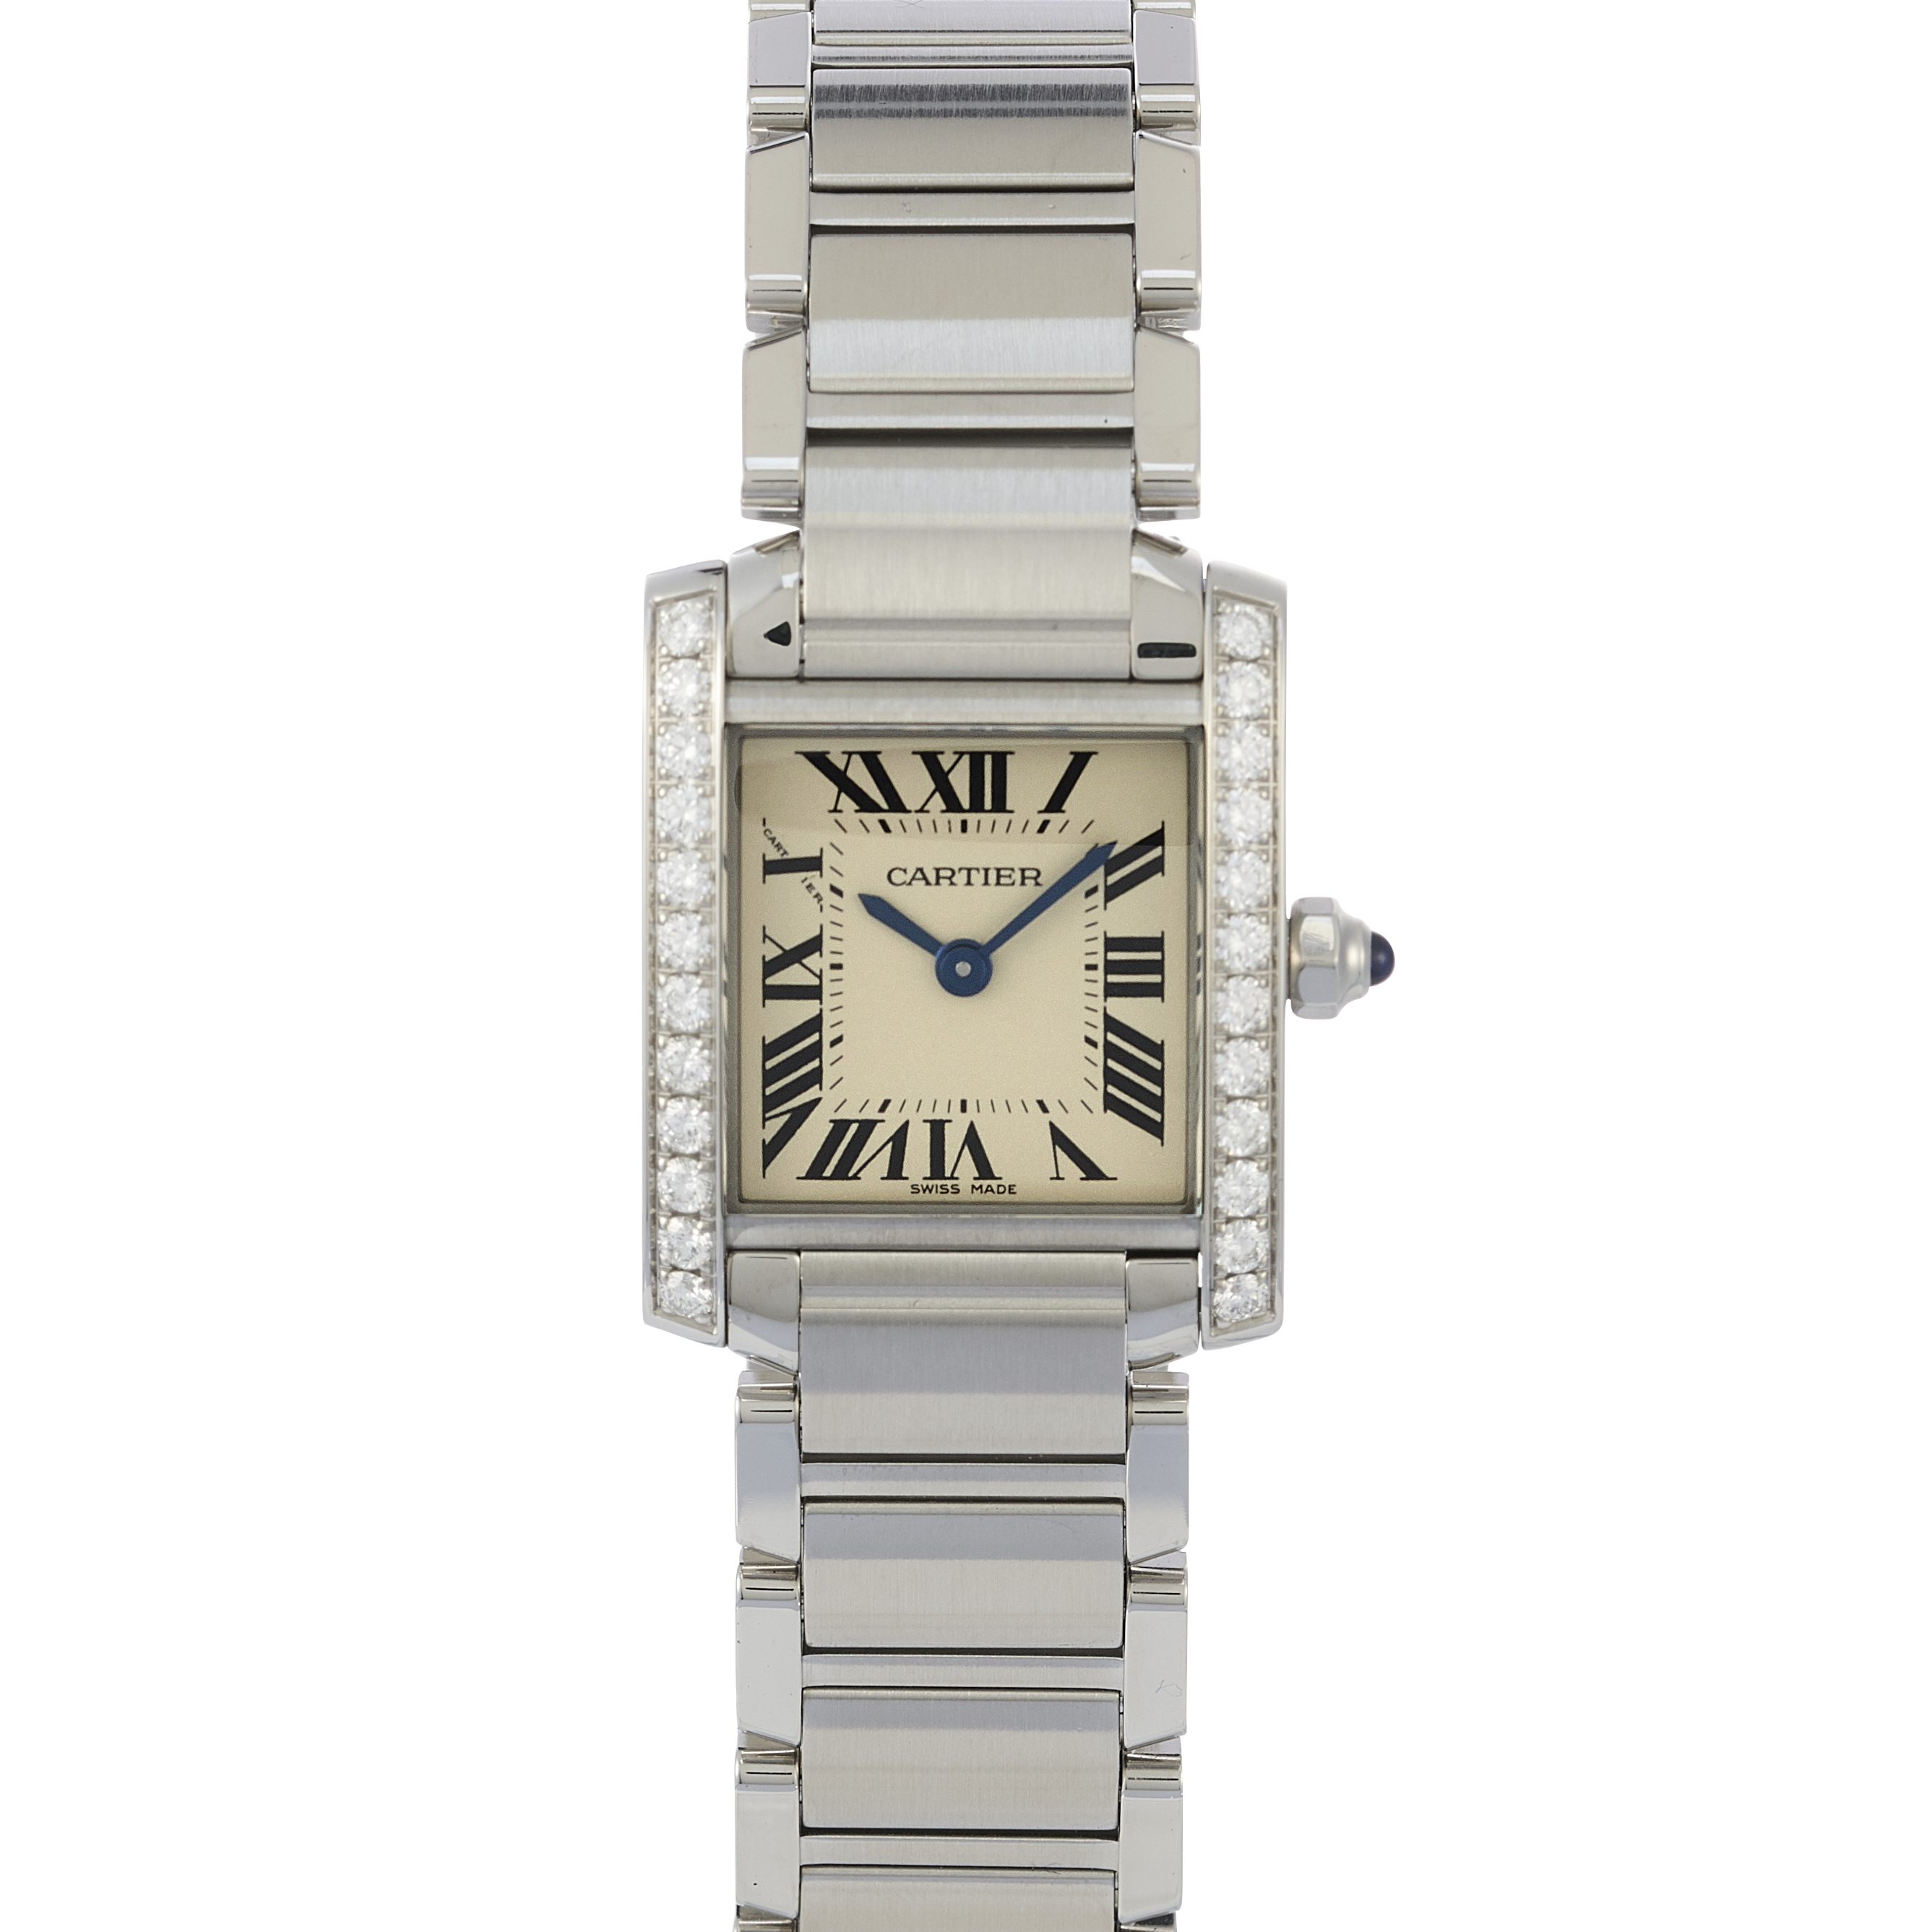 second hand cartier watches for sale uk